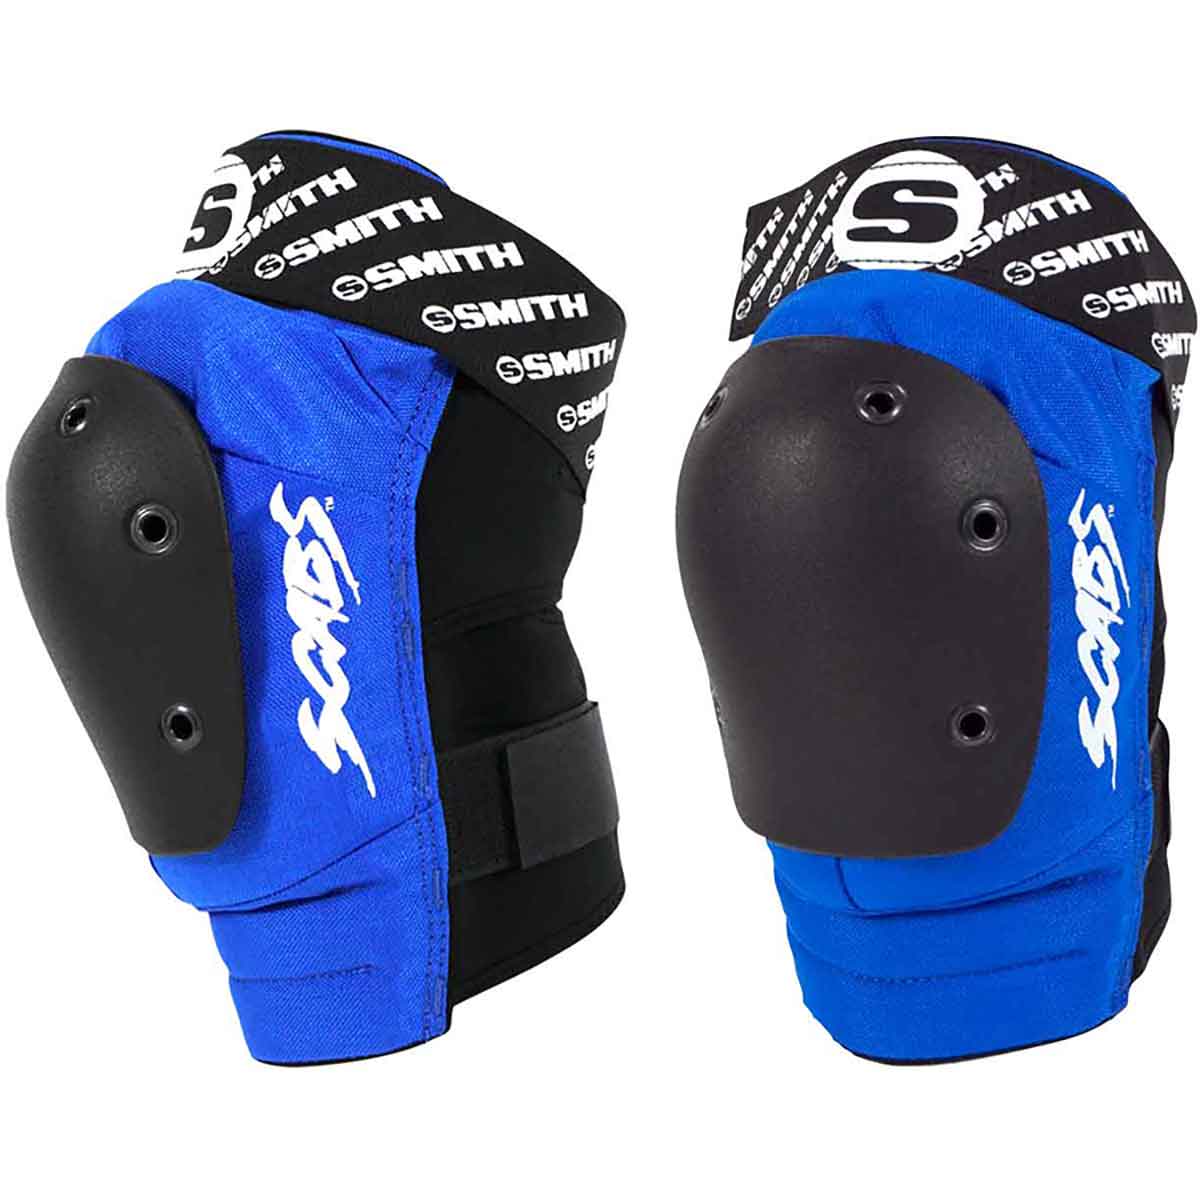 Smith Safety Gear Scabs Elite Knee Pads Small Medium